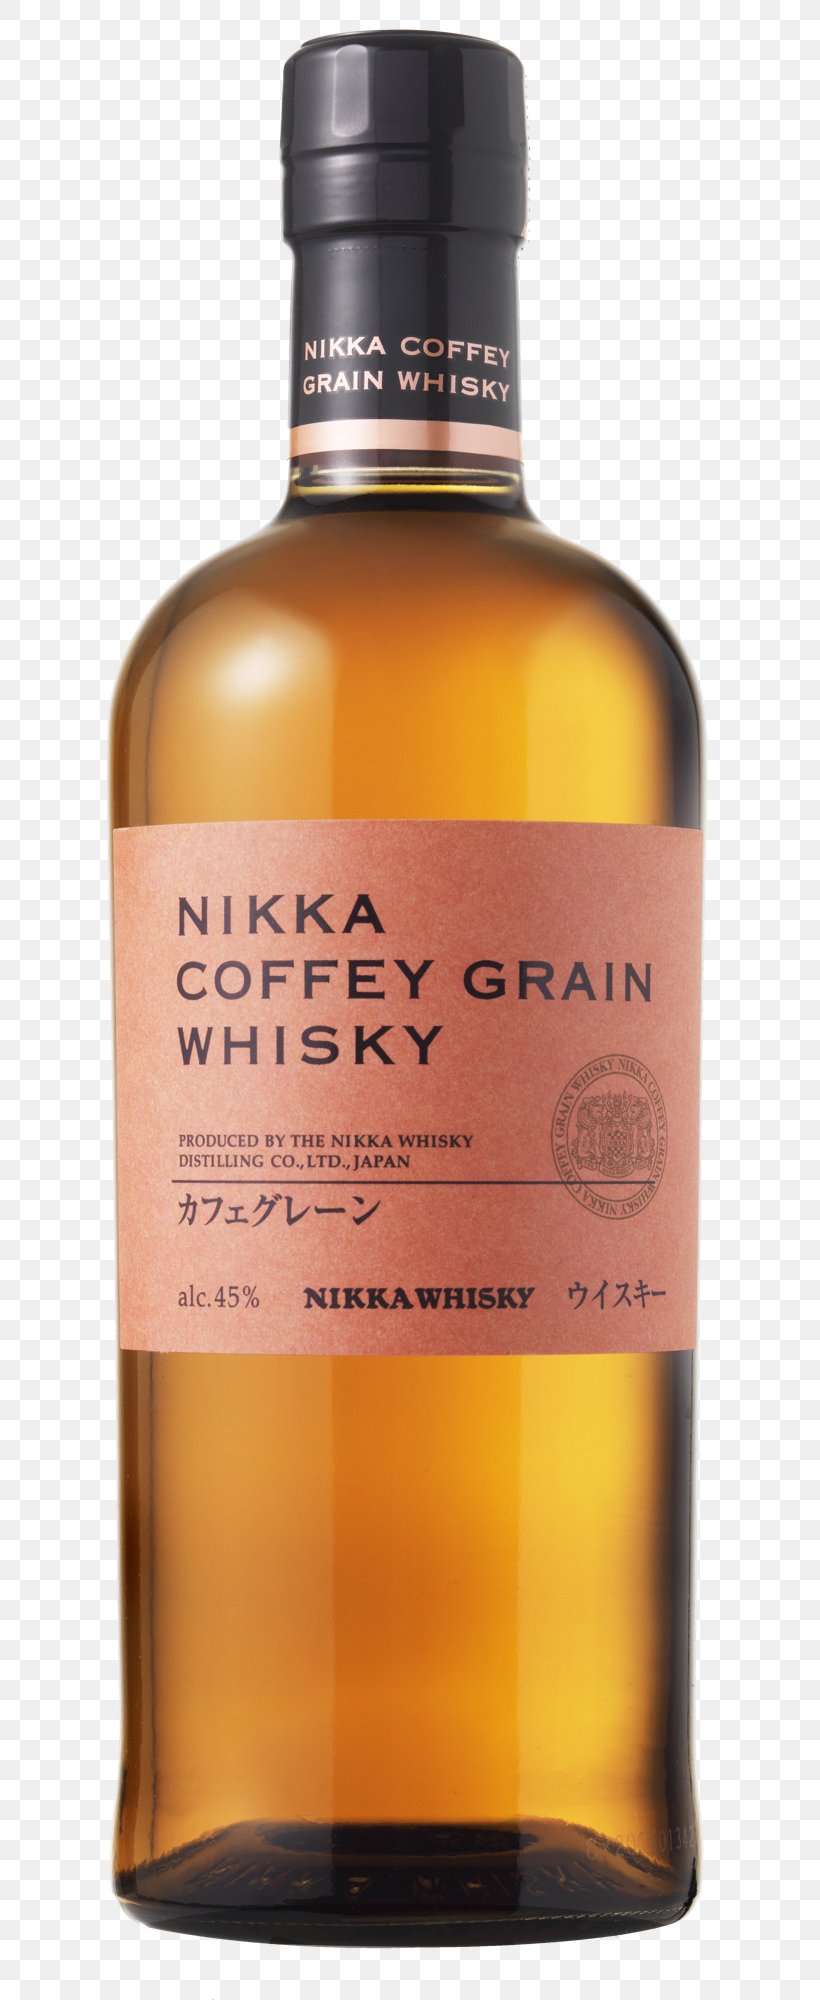 Whiskey Nikka Coffey Grain Whisky Japanese Grain Whisky Liqueur, PNG, 689x2000px, Whiskey, Alcoholic Beverage, Bottle, Bottle Shop, Canada Download Free